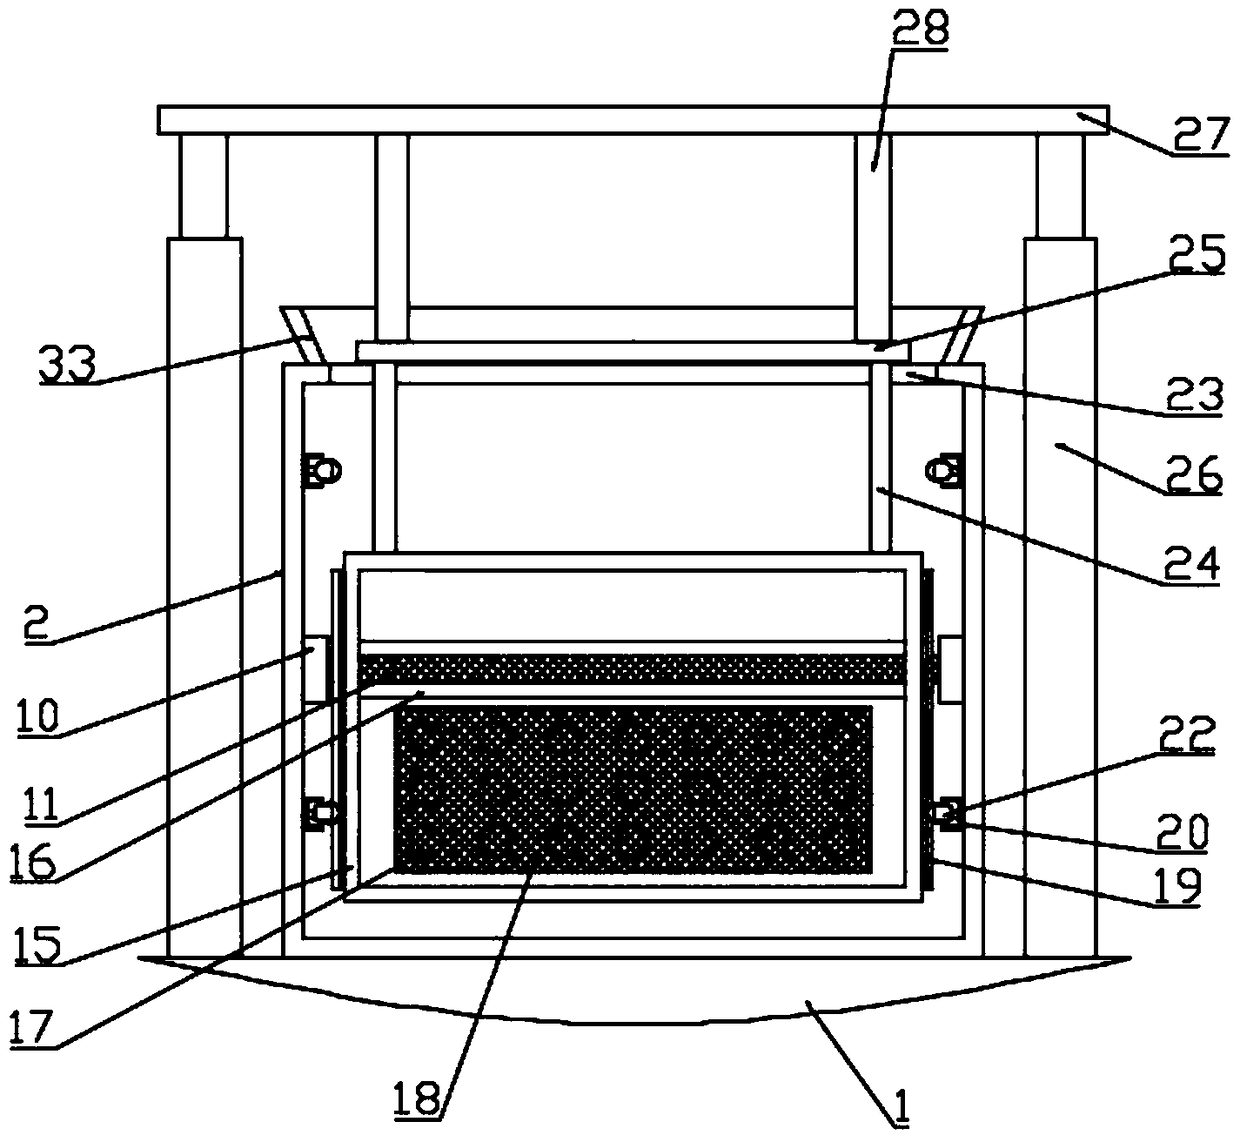 Sewage filtering device capable of automatically collecting impurities